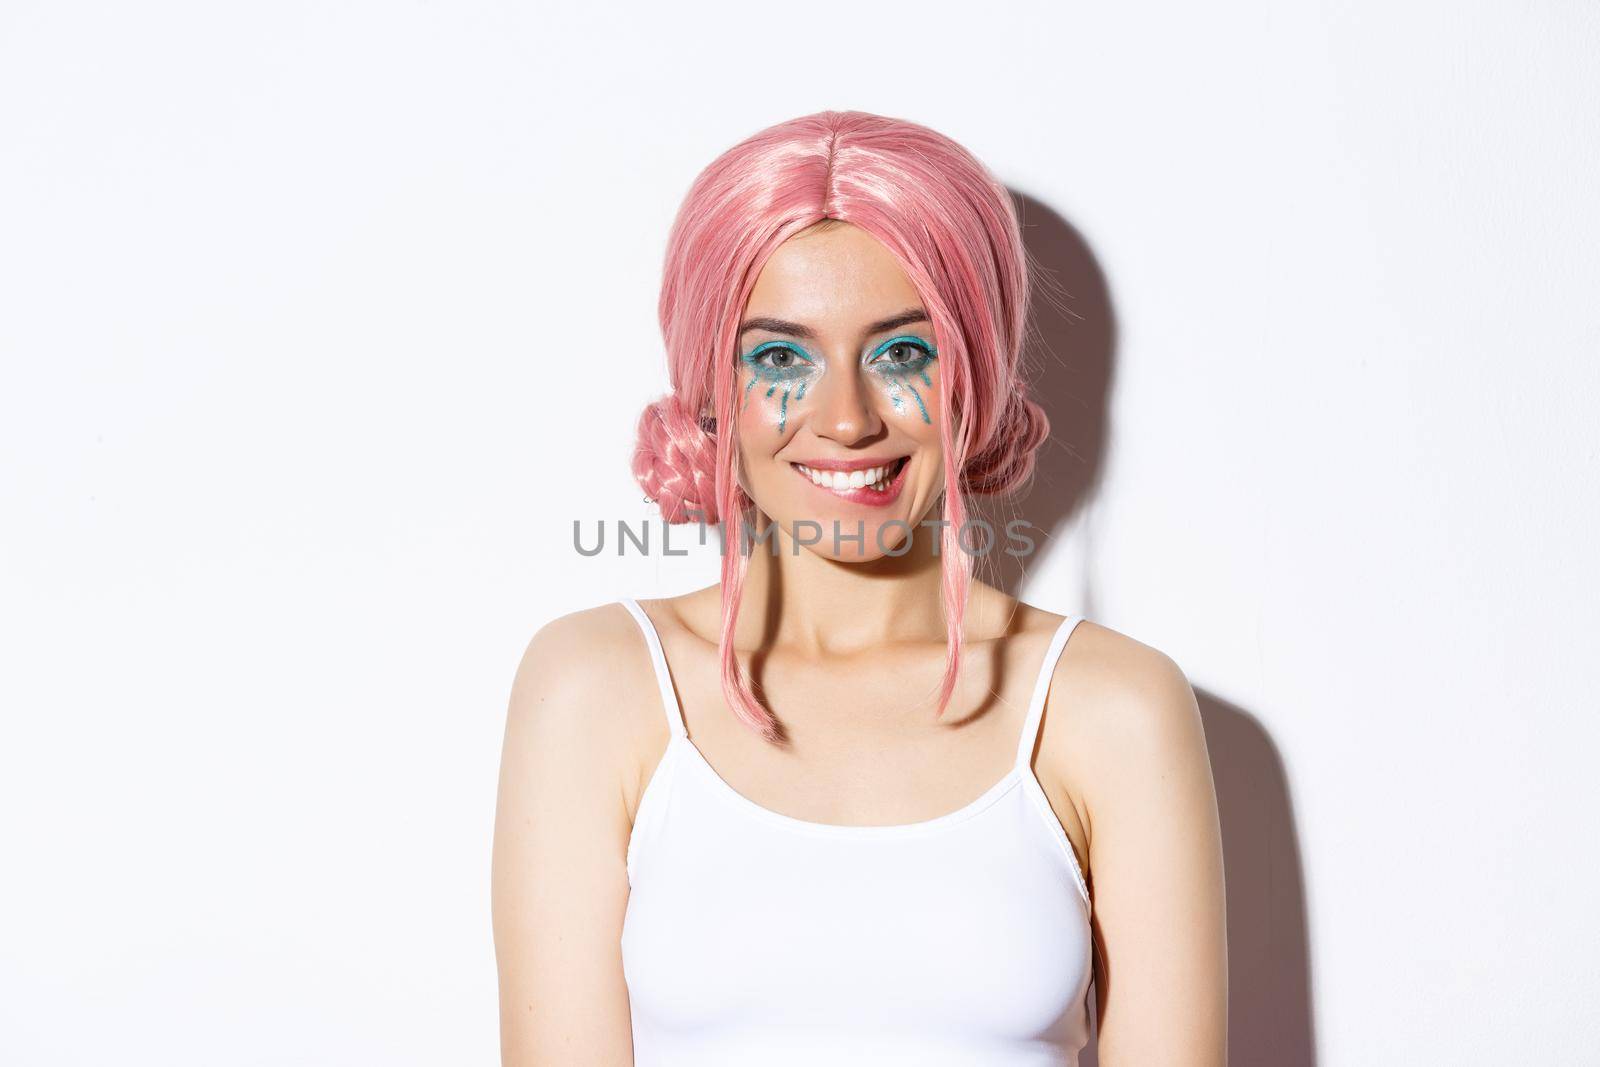 Close-up of flirty attractive female model in pink wig, with bright party makeup, biting lip and smiling, looking at something tempting, standing over white background.